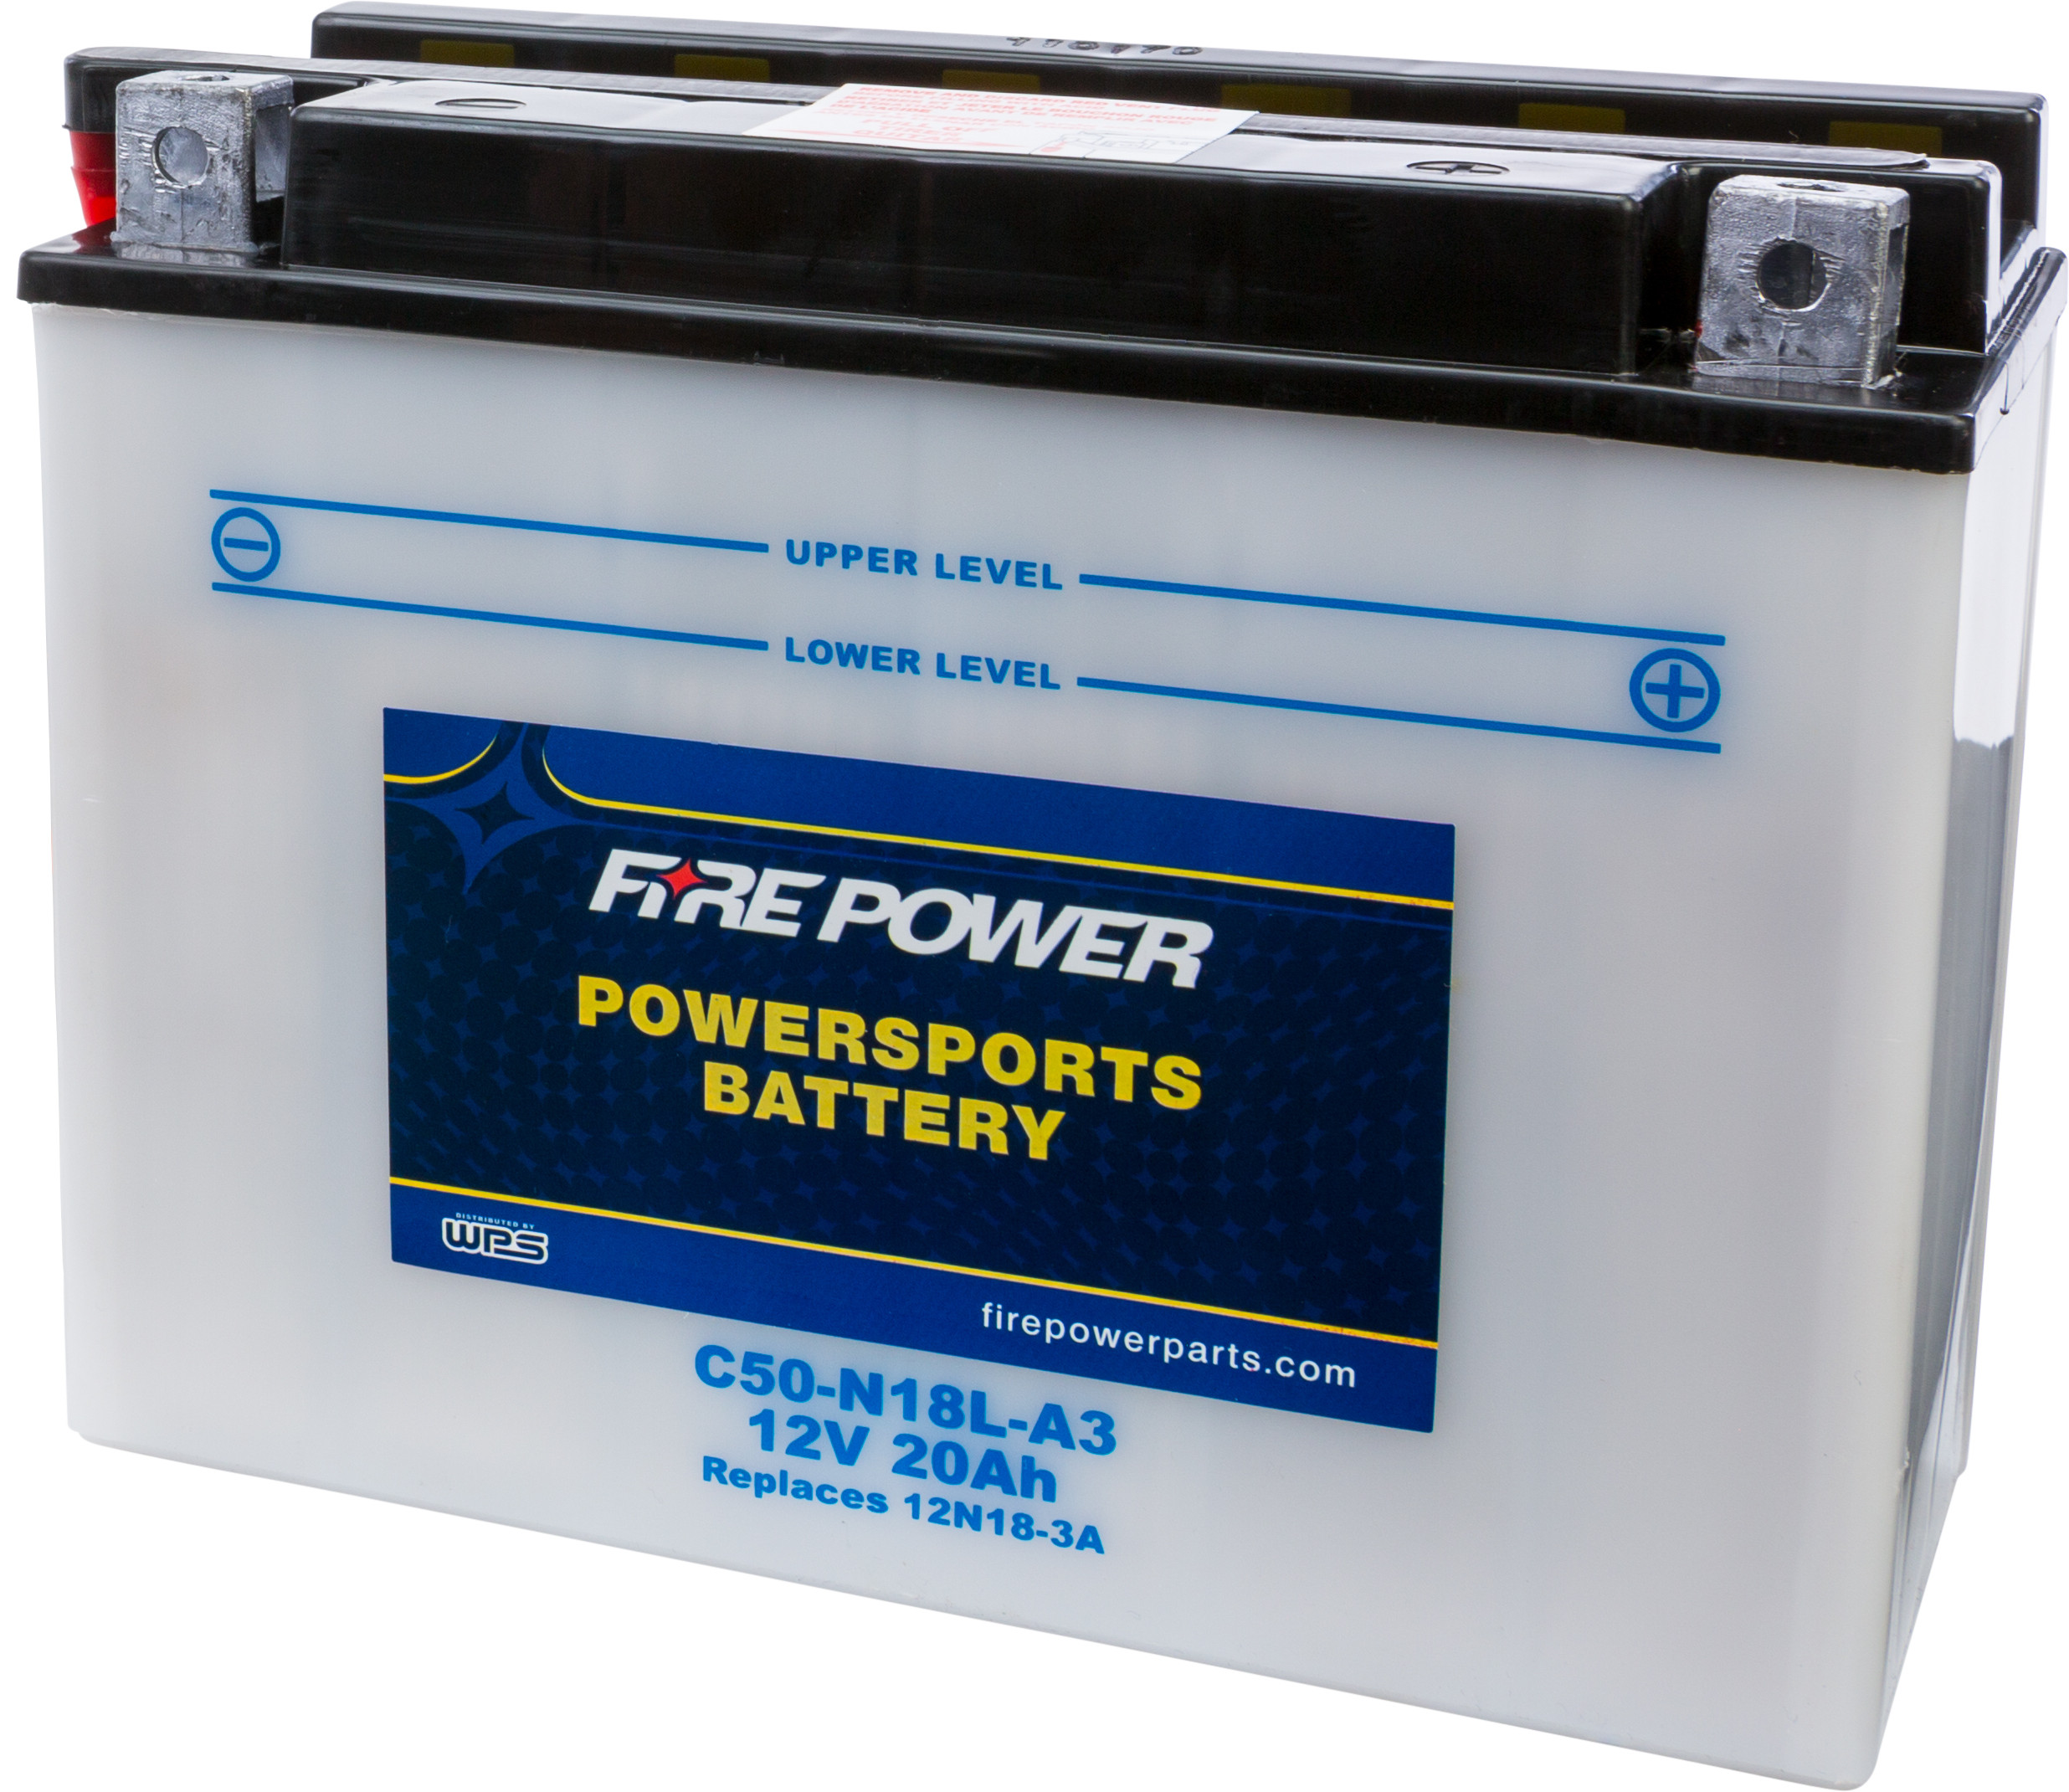 12V Heavy Duty Battery - Replaces Y50-N18L-A3 - Click Image to Close